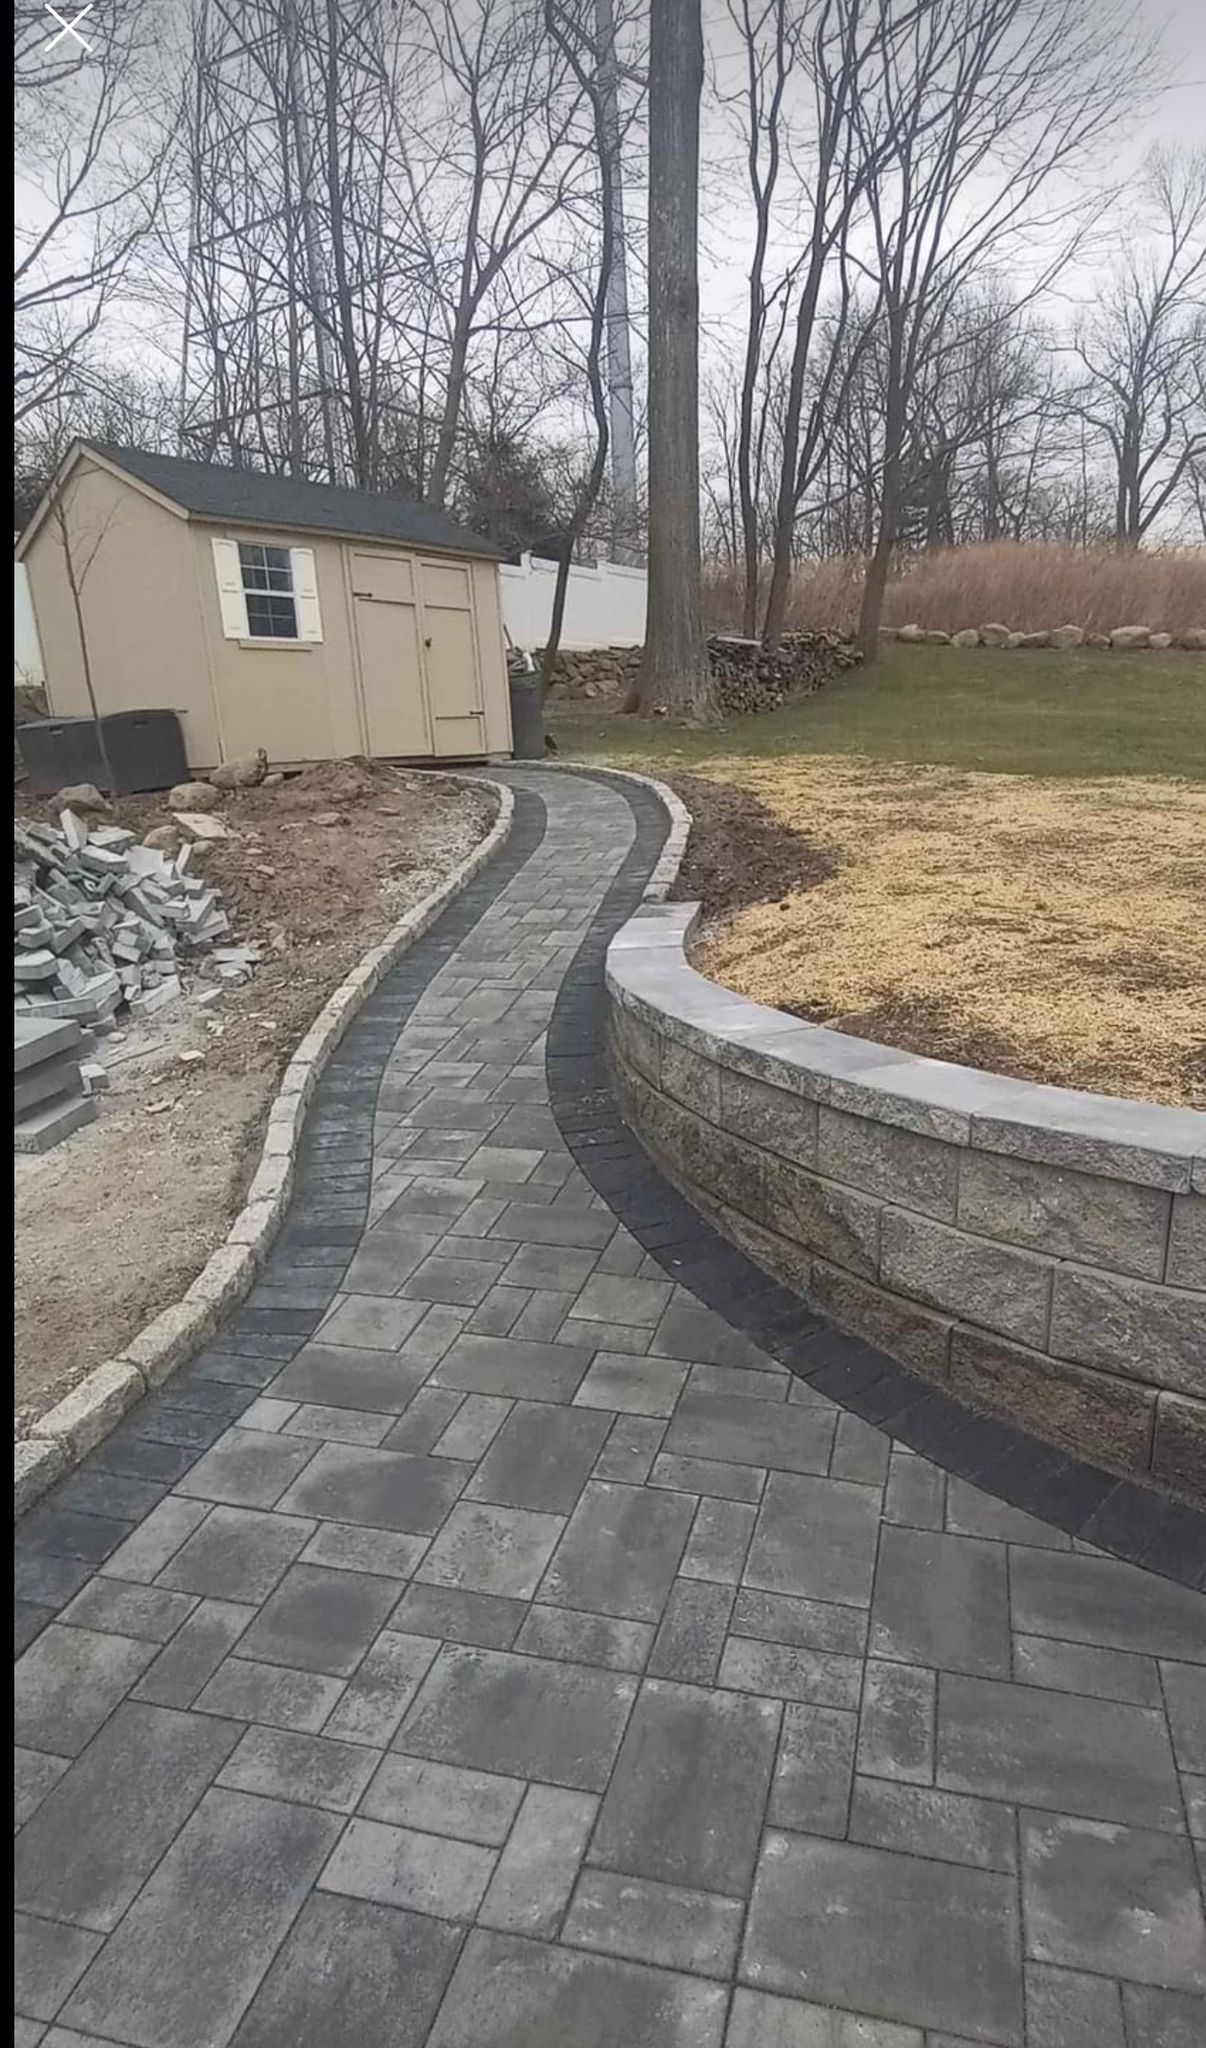 MJD Paving and Masonry Inc Projects
Free On-Site Estimates | Emergency Services Available | 2-Year W MJD Paving and Masonry Inc Ashburn (703)930-5140